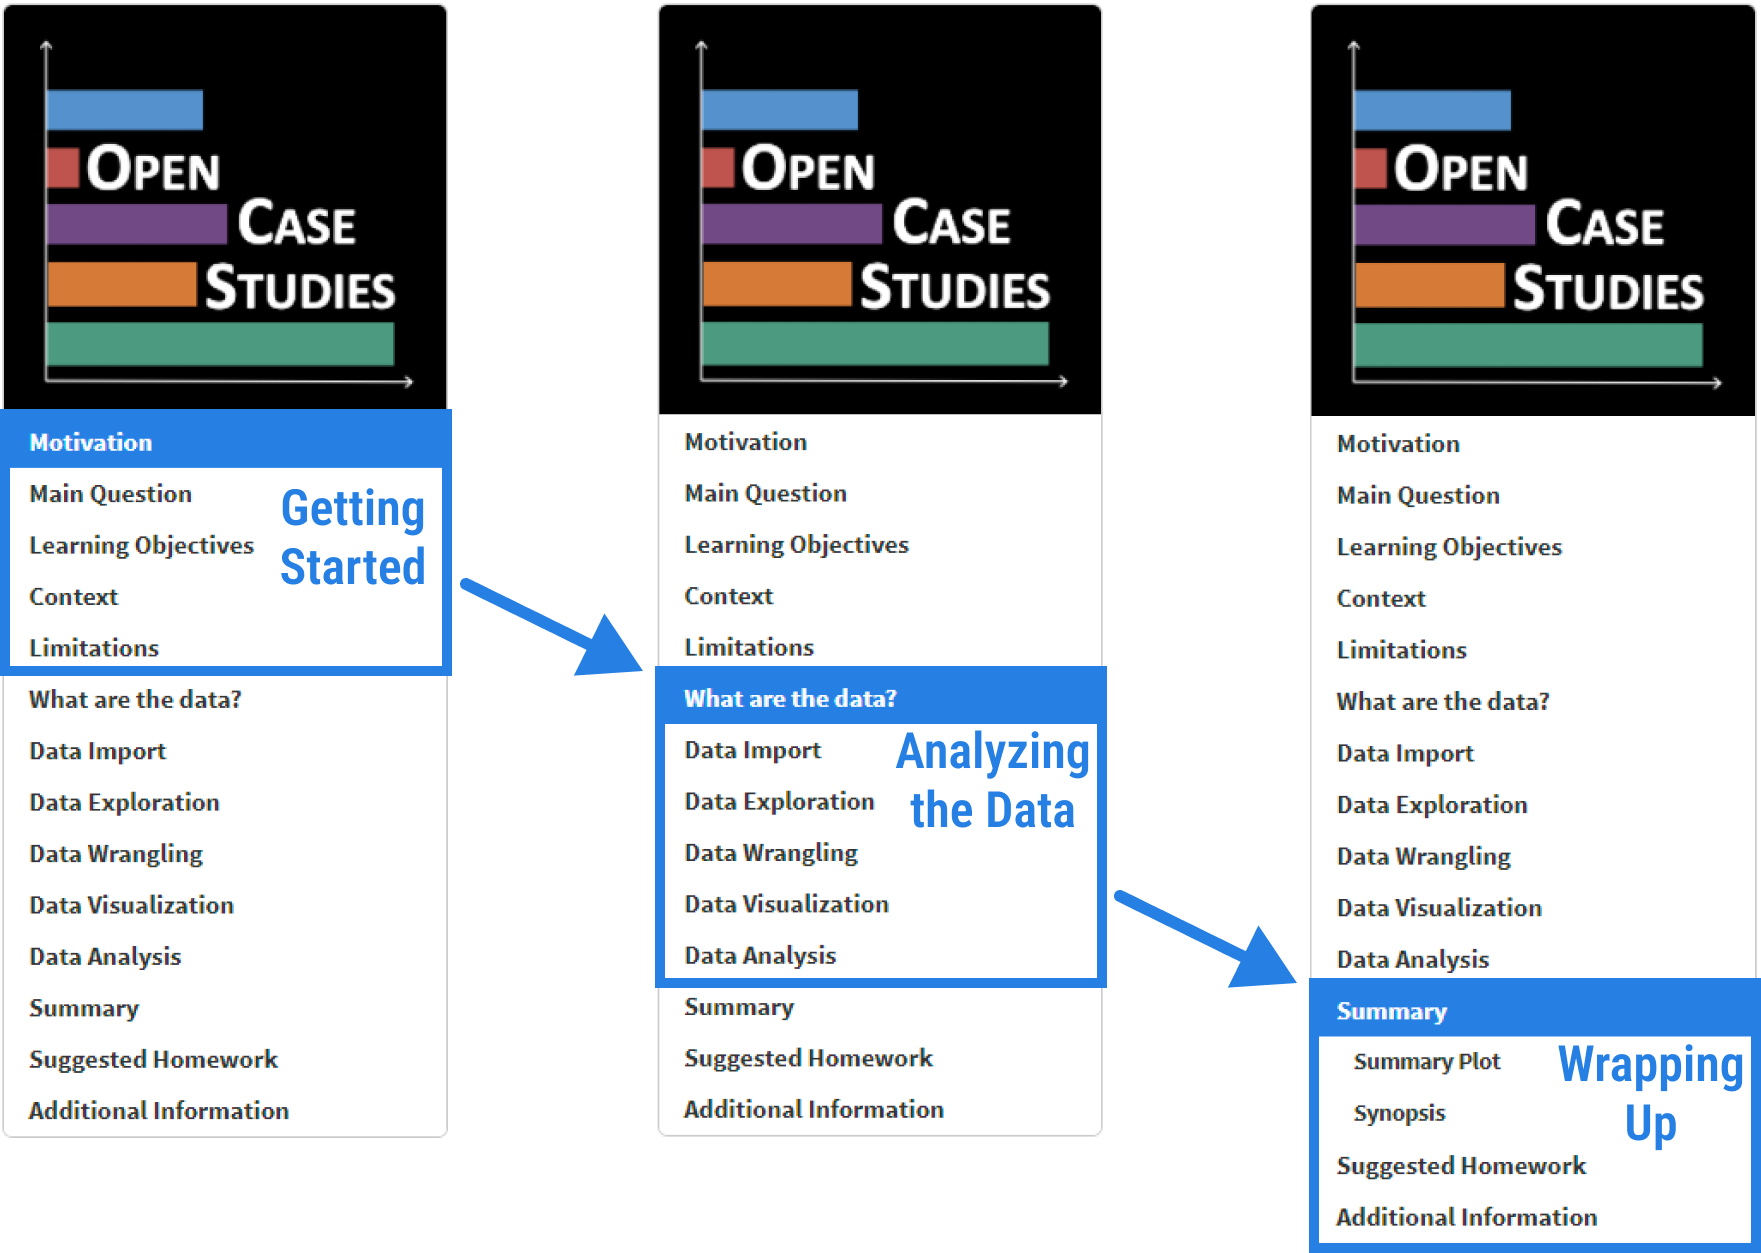 Open Case Study Anatomy in the Table of Contents